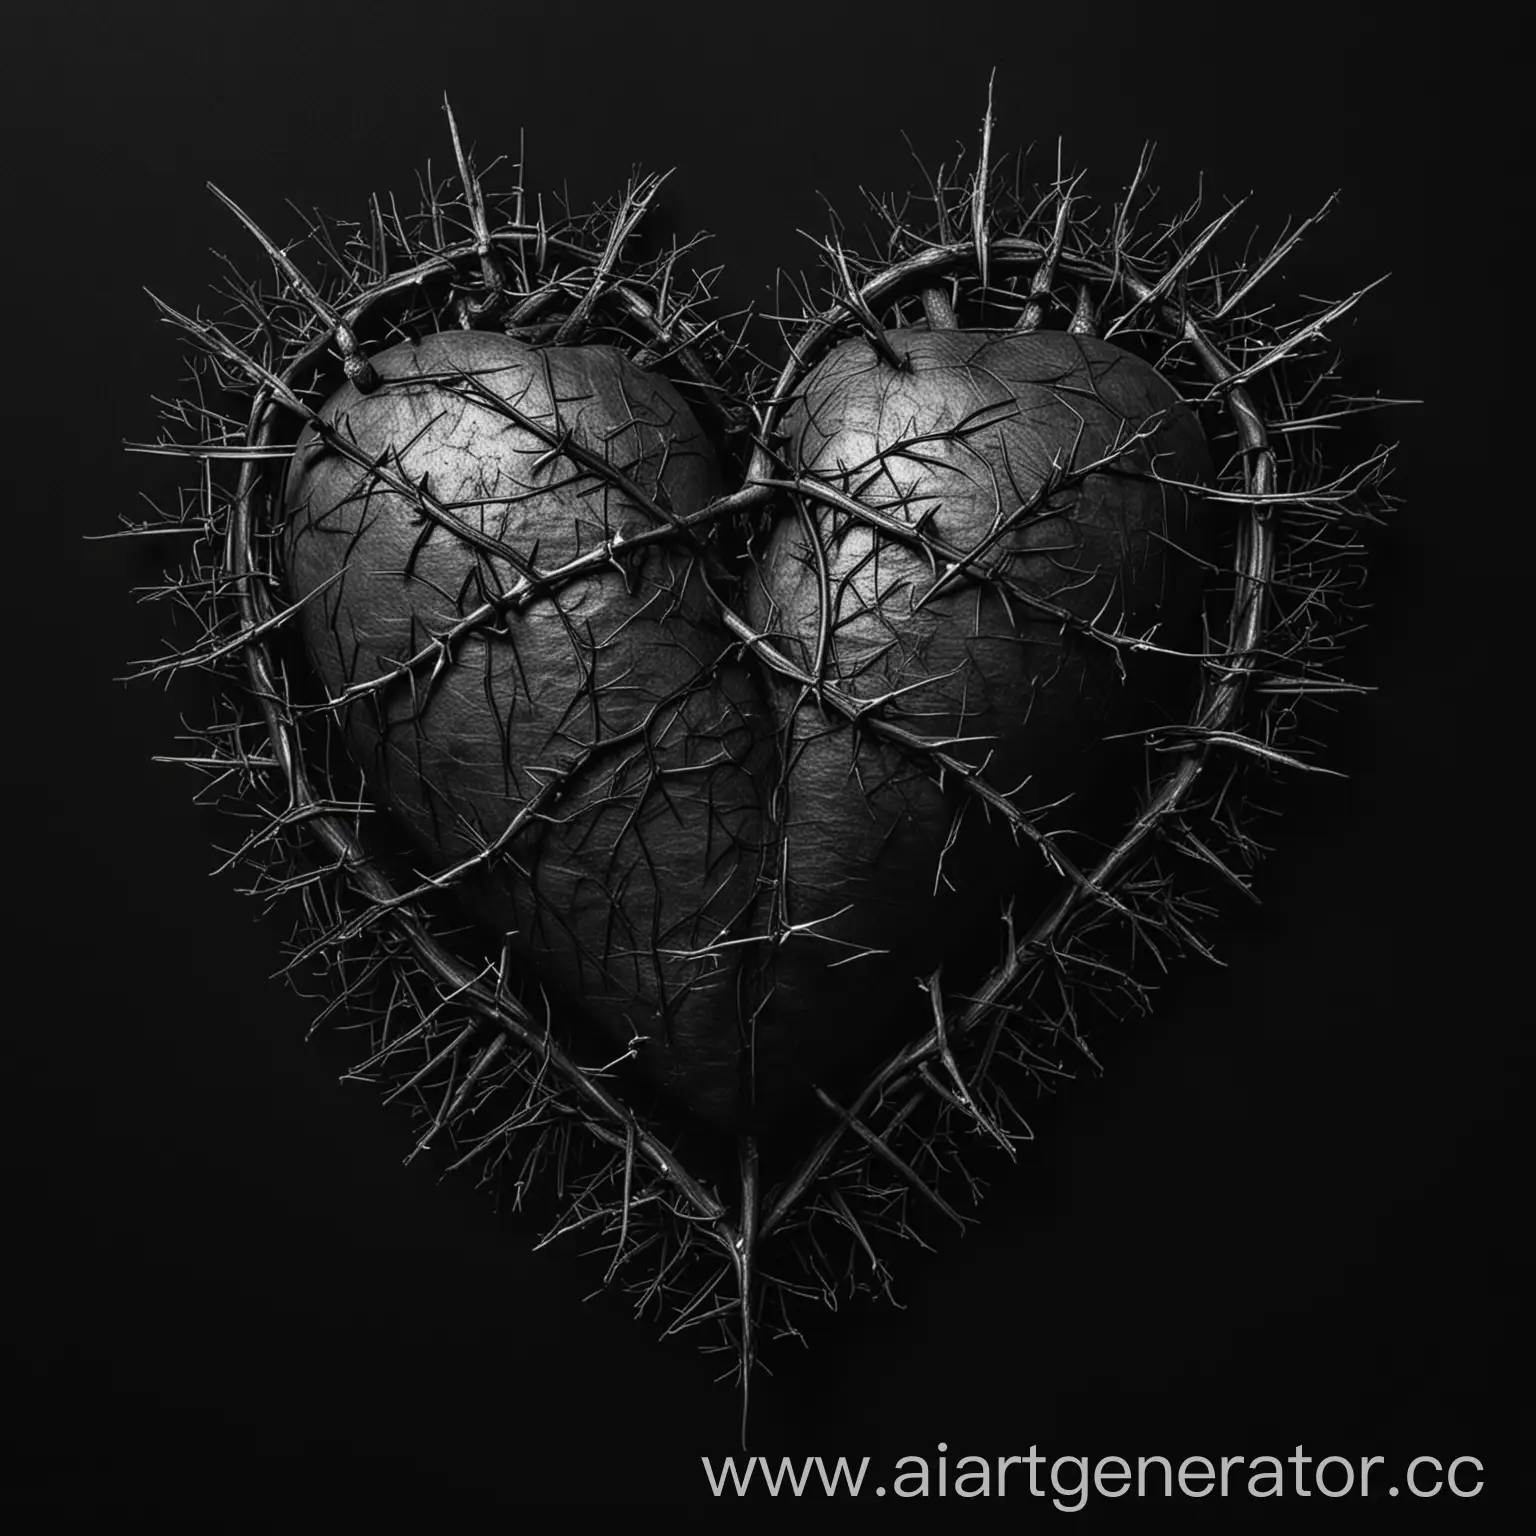 Heart-Shape-with-Thorns-on-Black-Background